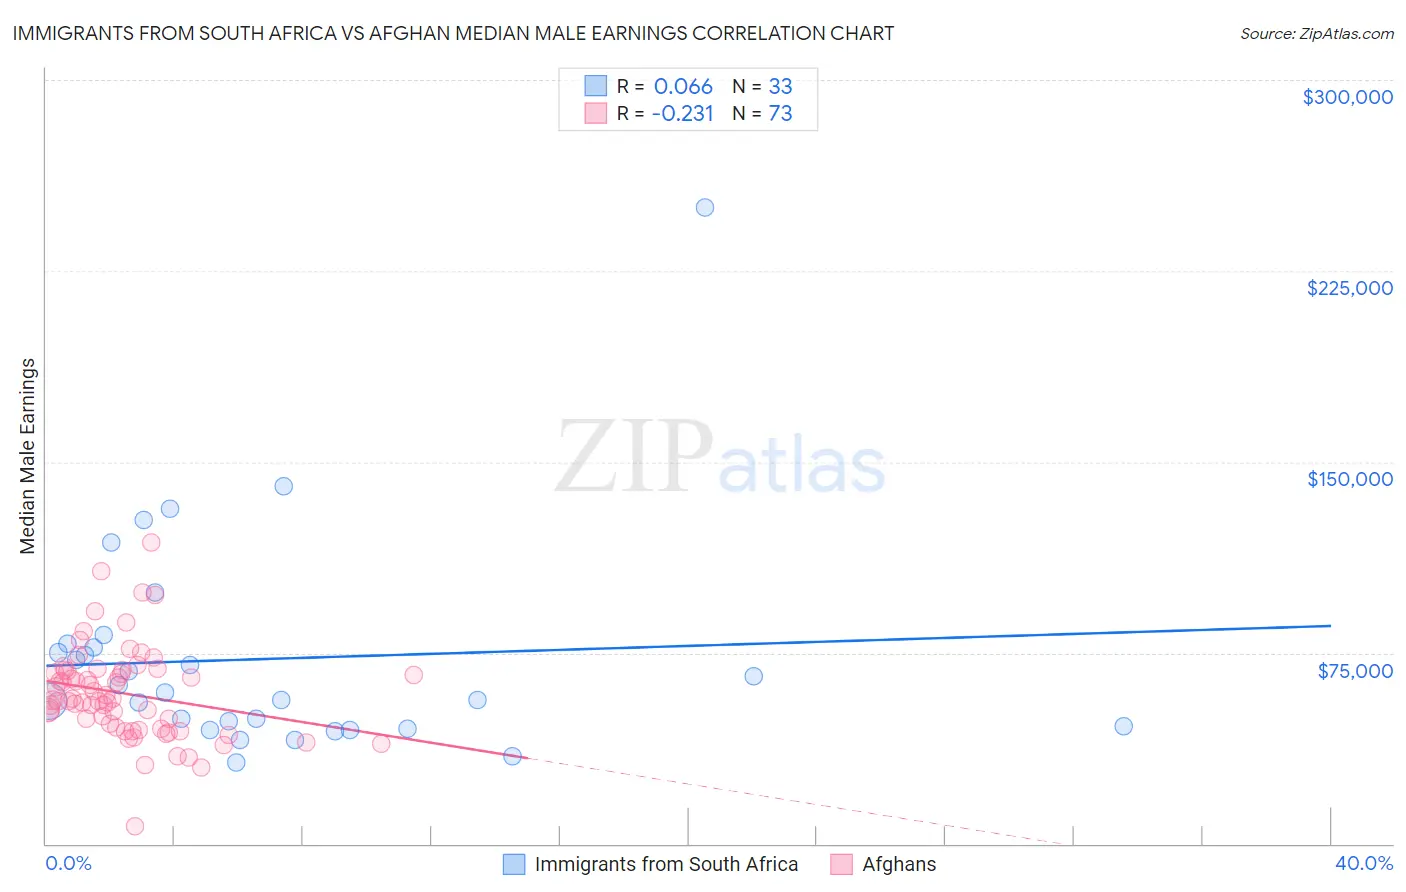 Immigrants from South Africa vs Afghan Median Male Earnings